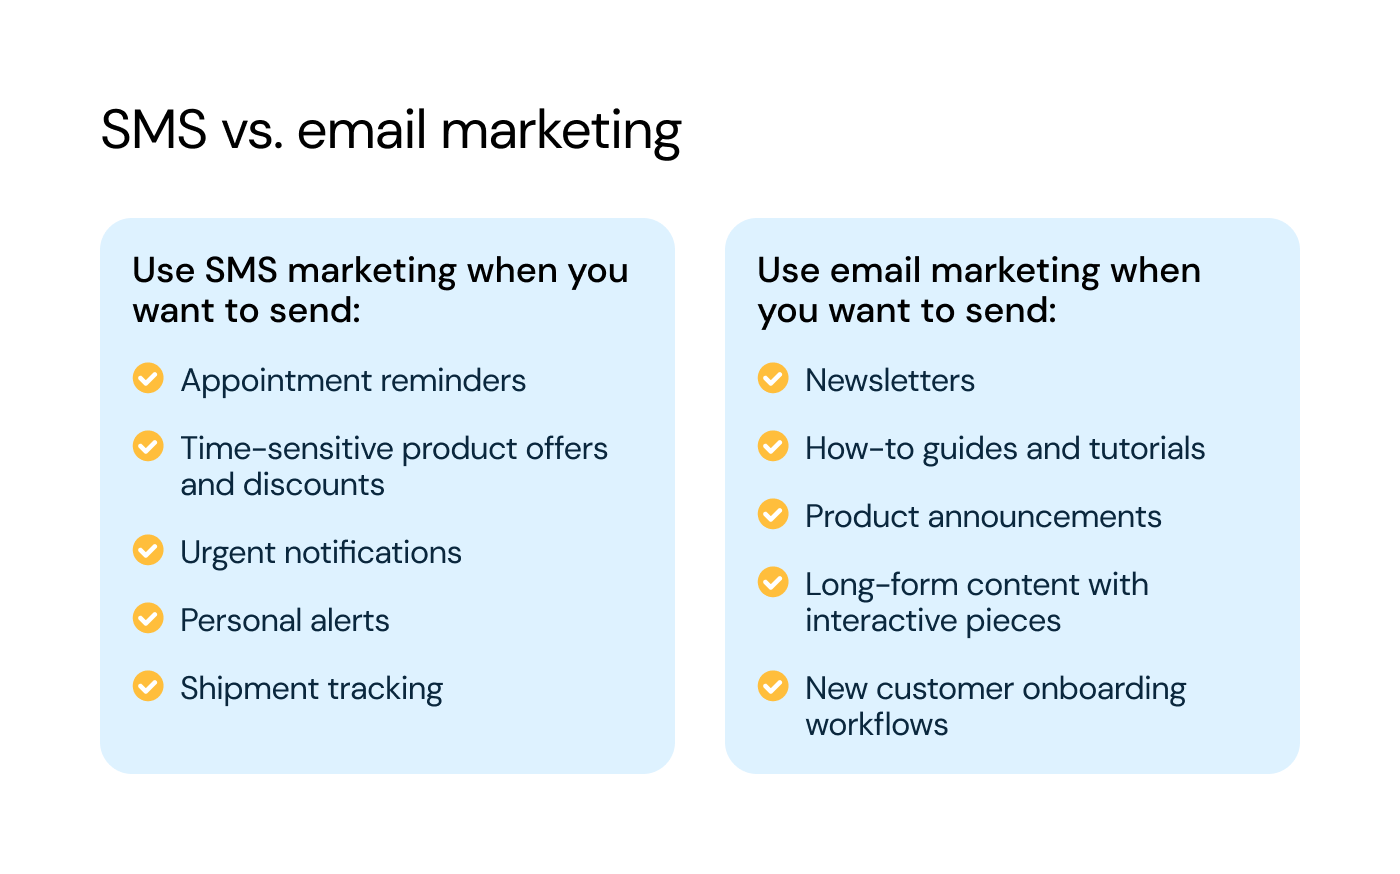 When to use SMS marketing vs. email marketing